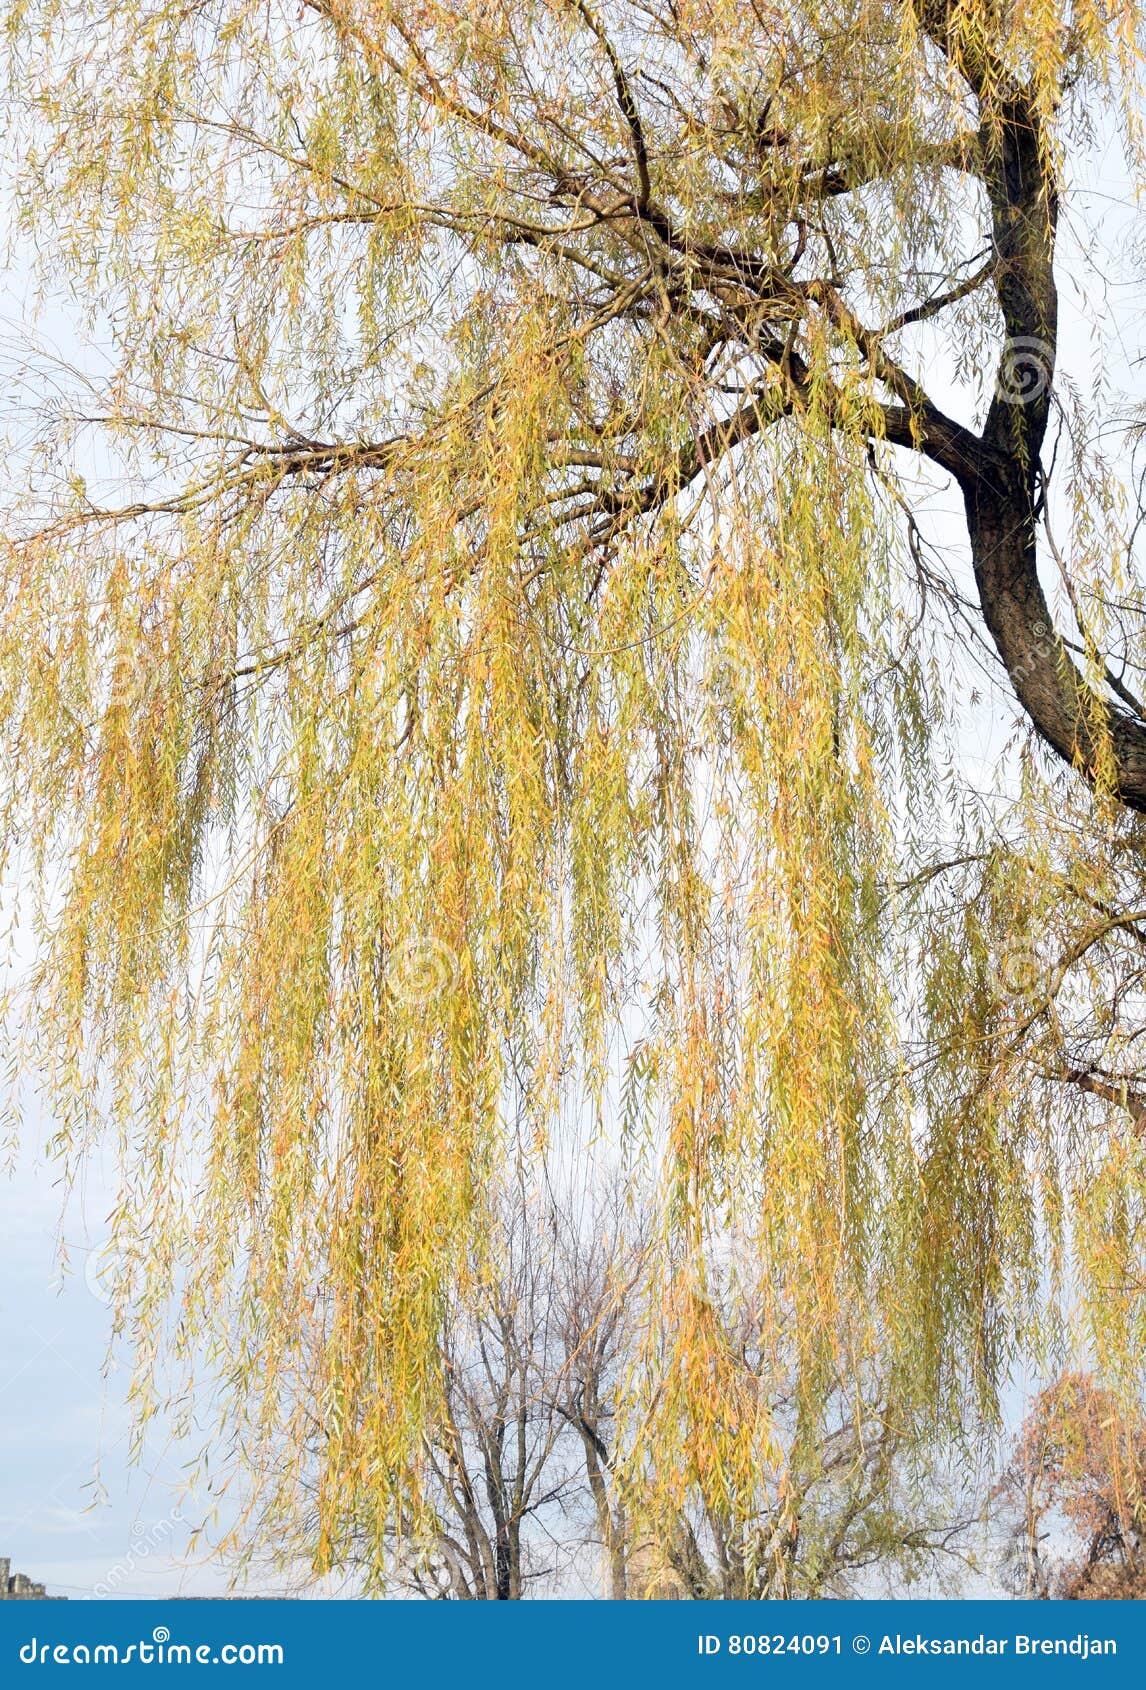 Willow branches 8x